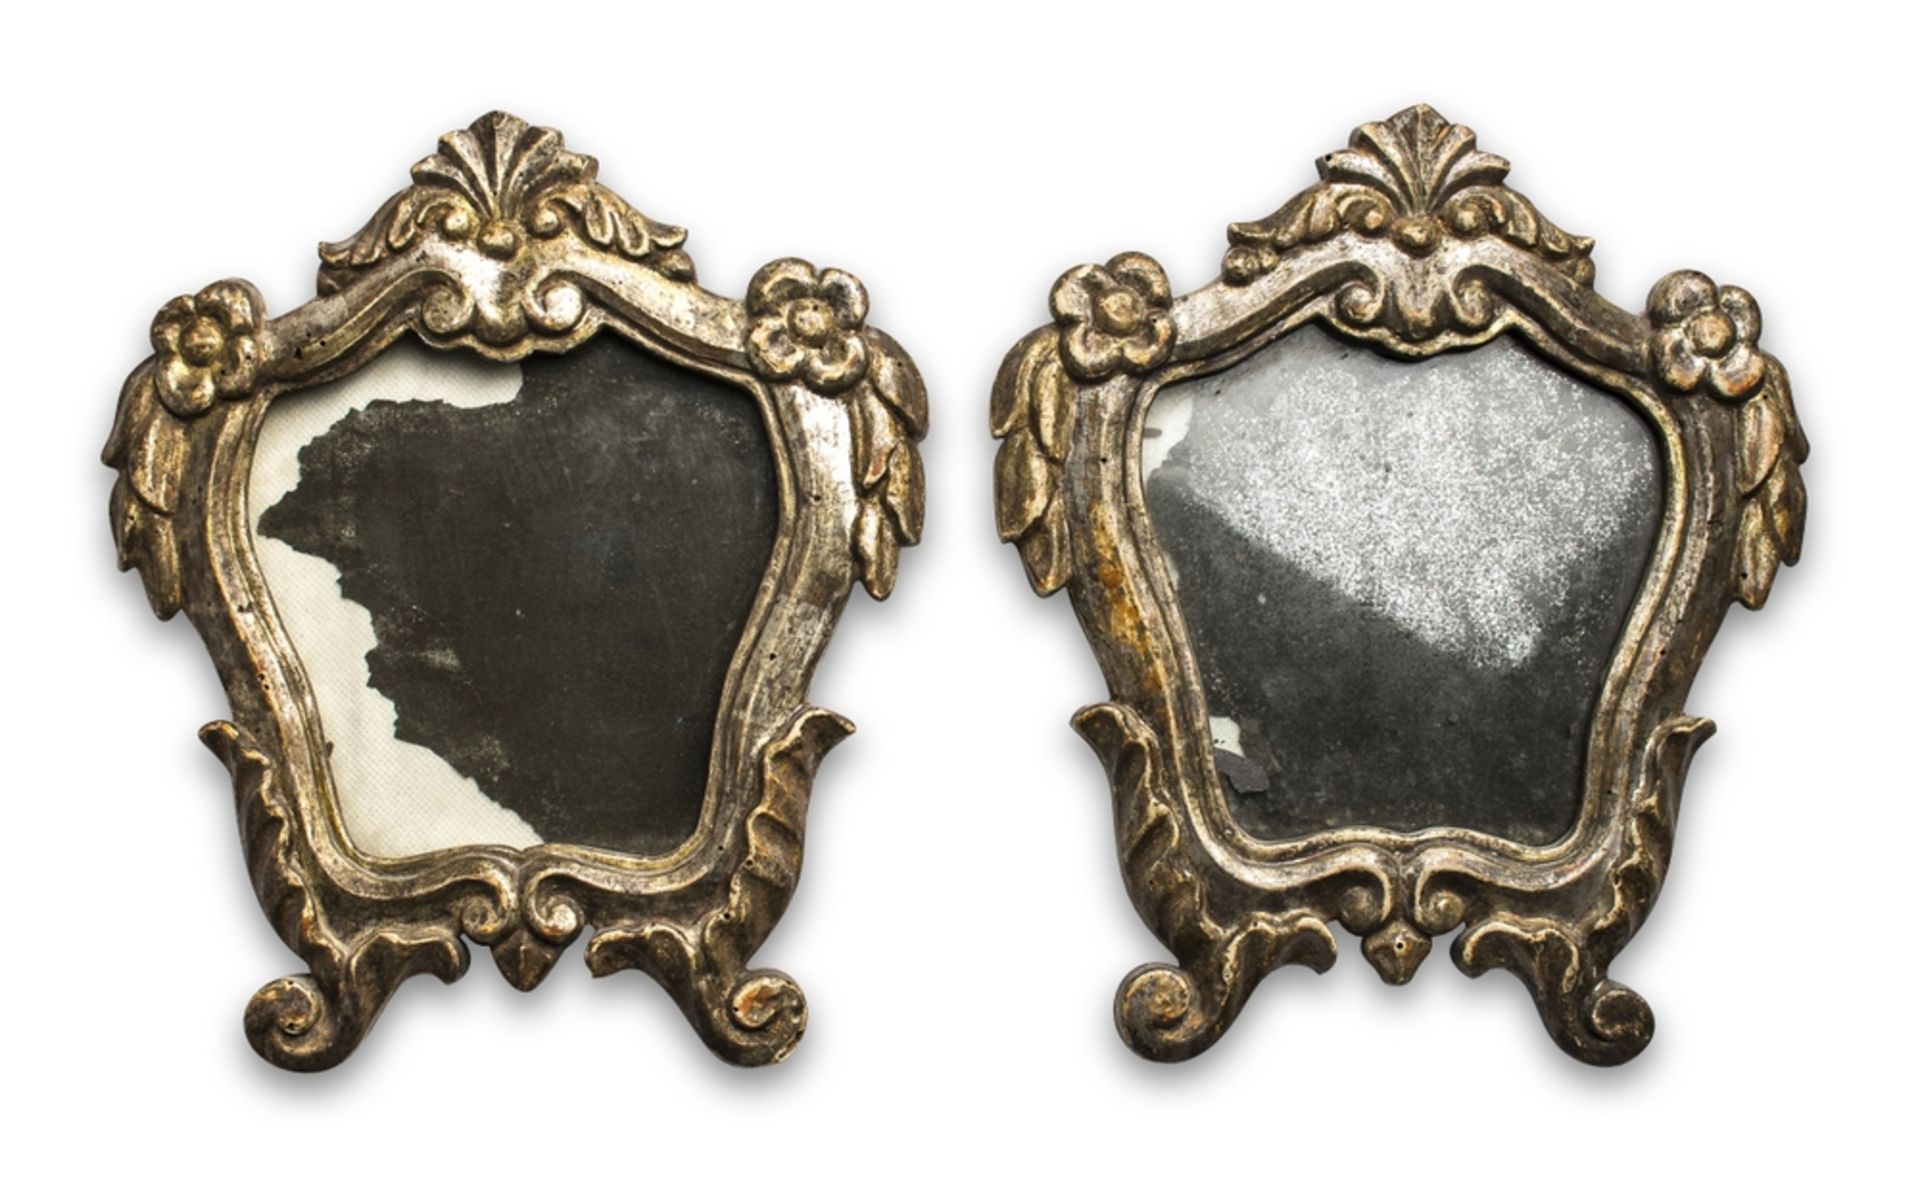 Pair of Silvered wood appliques, 18th century Carved with leaves, flowers and curls. mirrors.